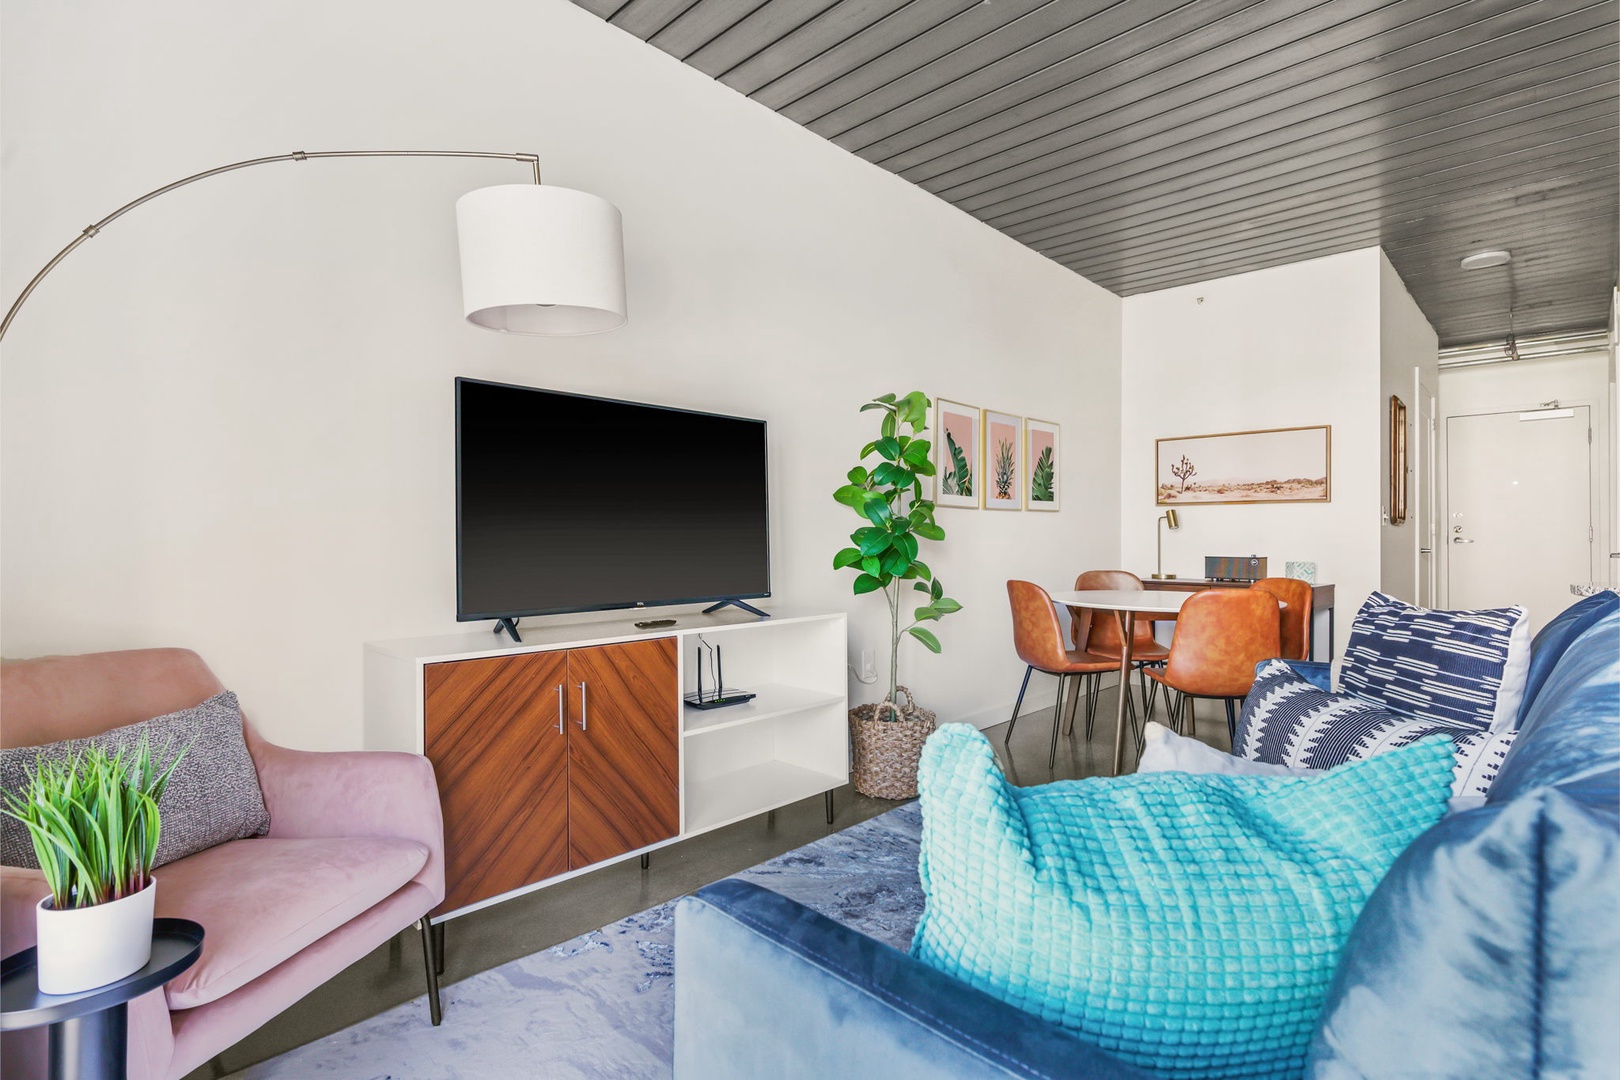 Snuggle in and enjoy the smart TV experience in this chic and comfortable modern living area.